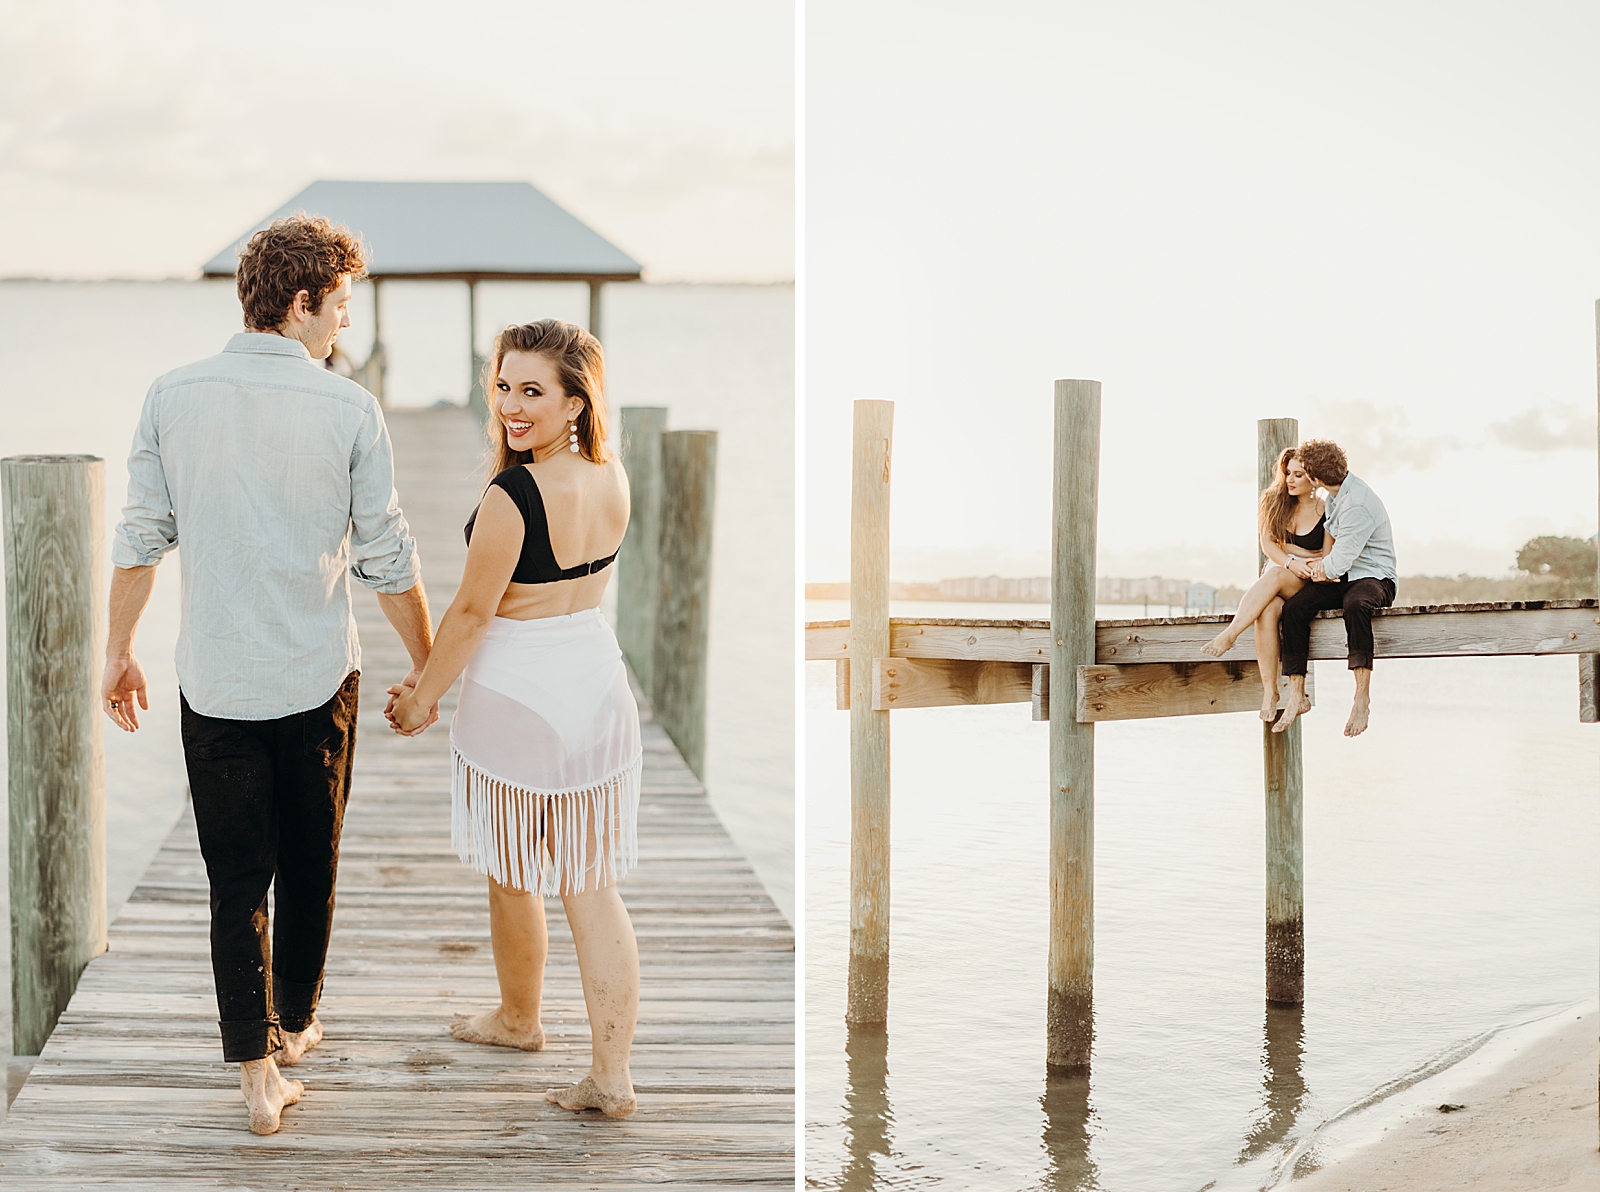 Couple holding hands and walking on wooden beach pier